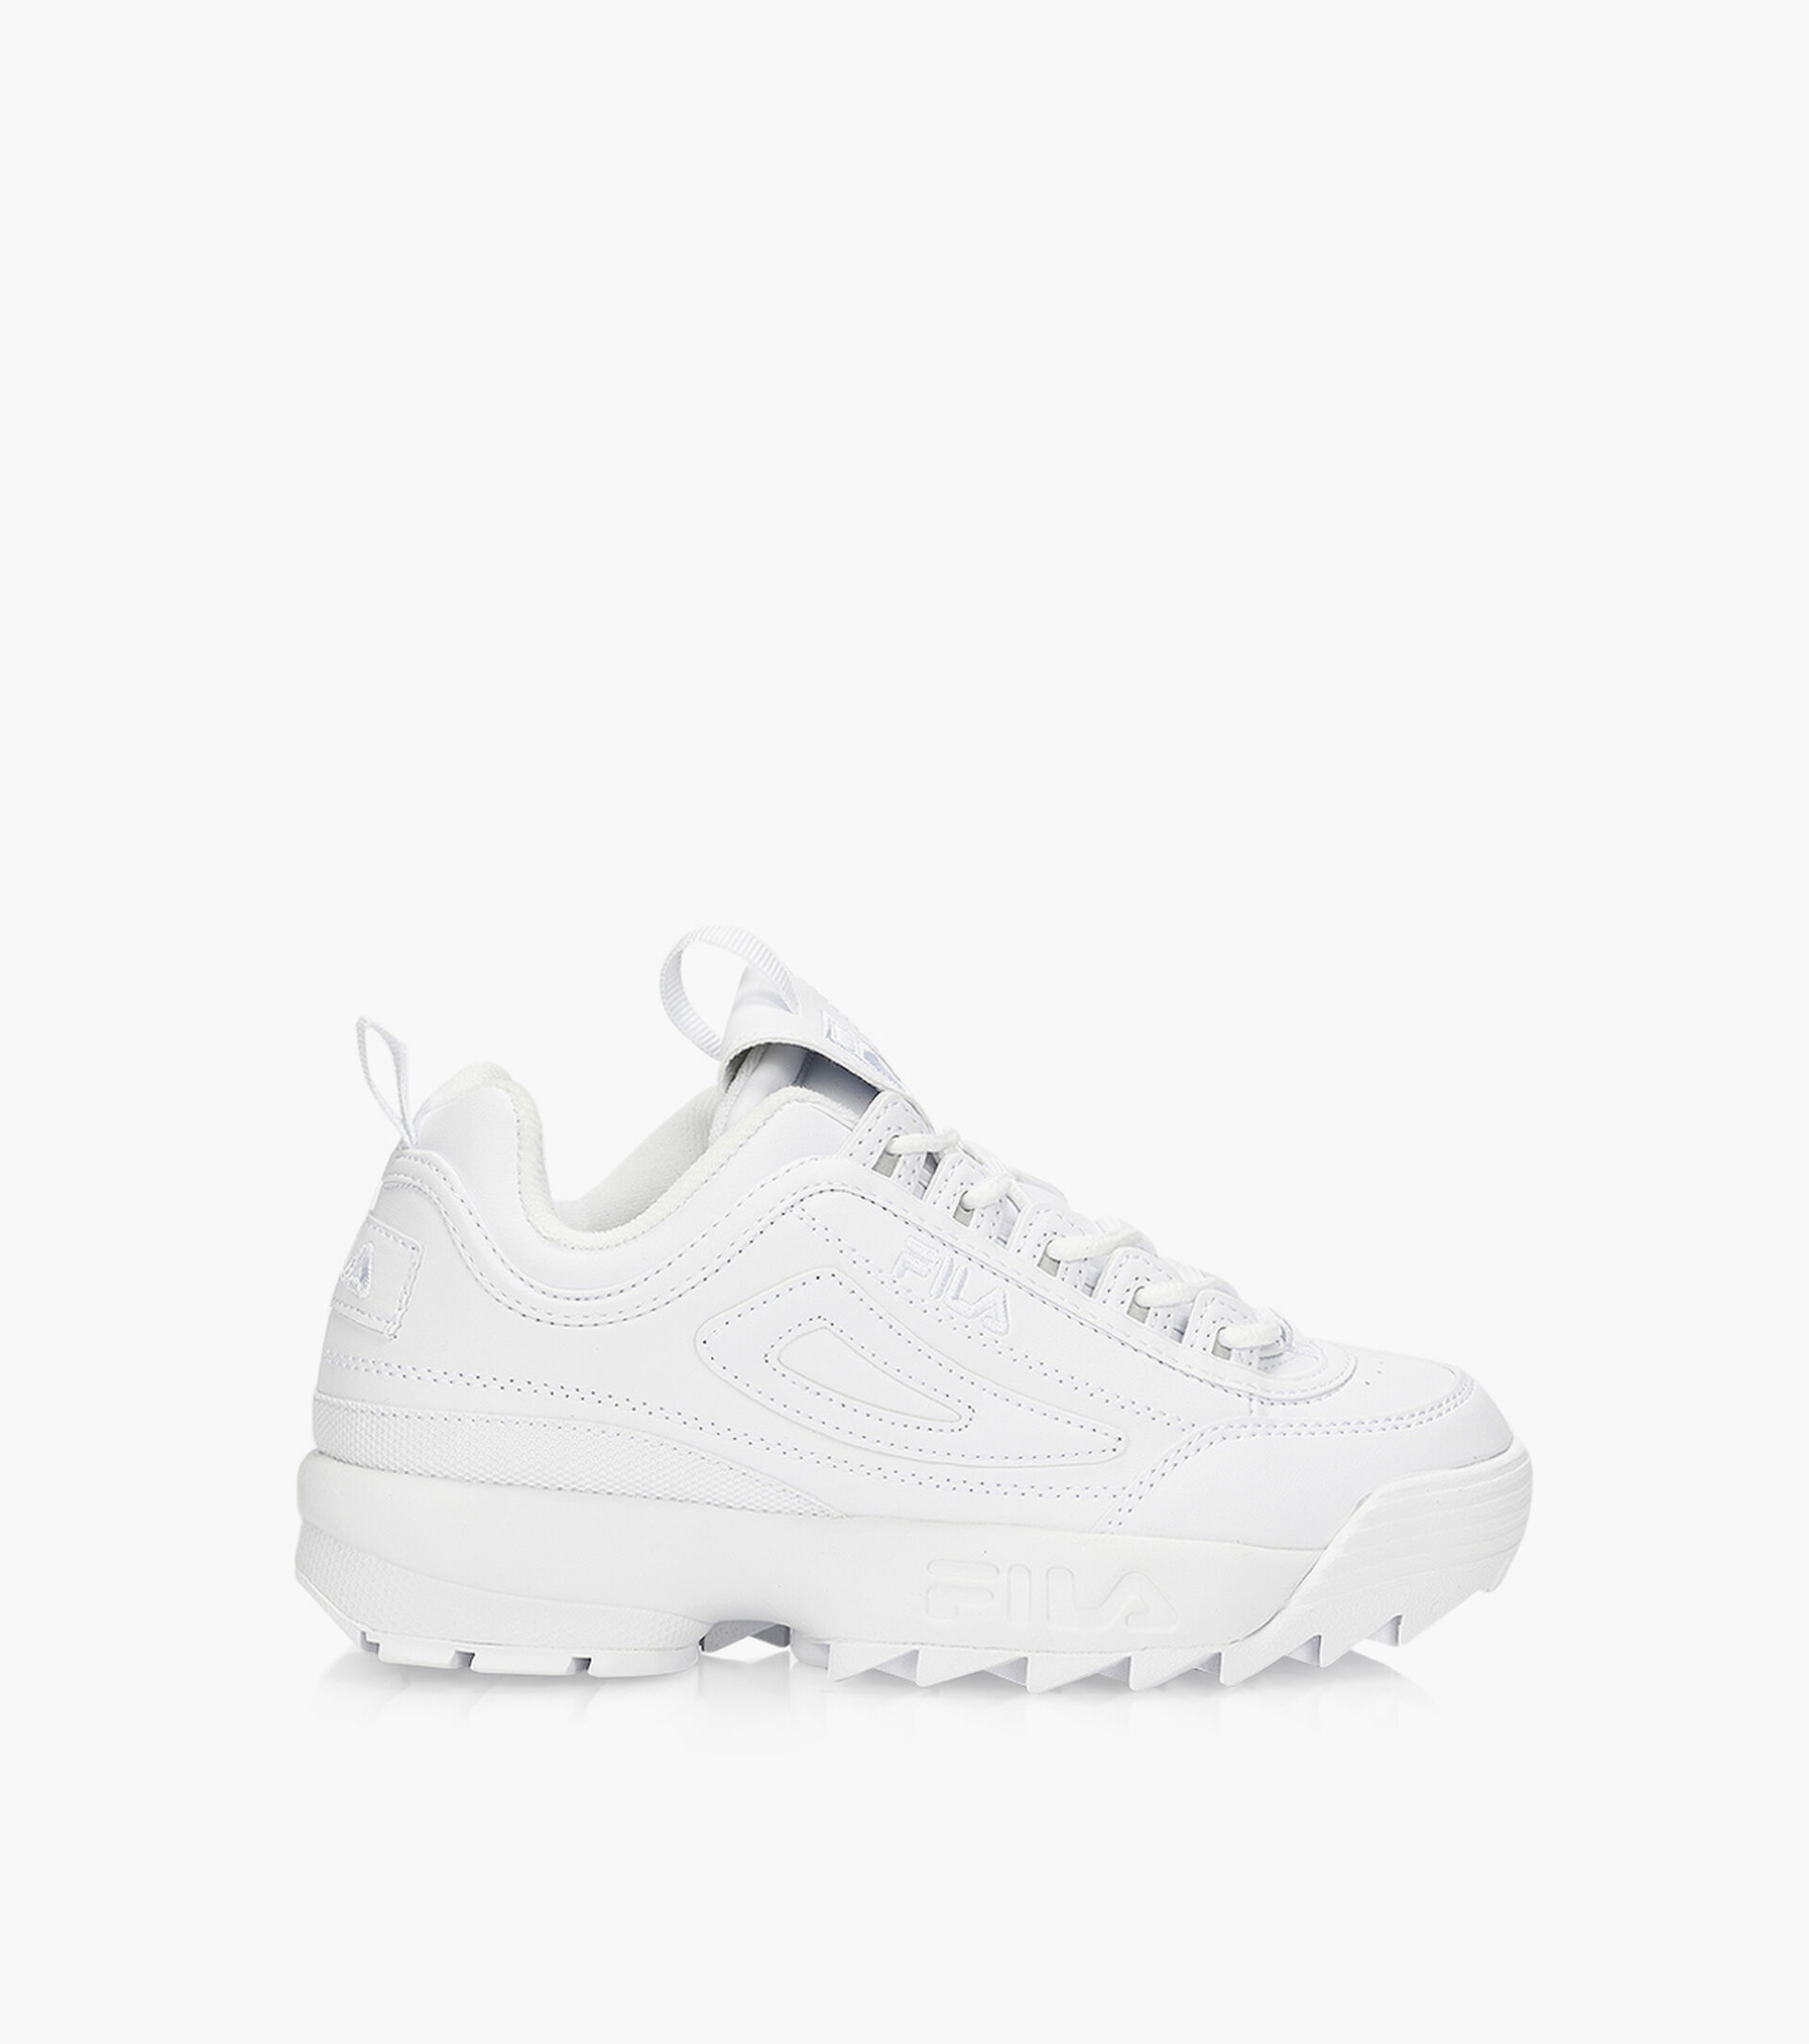 FILA DISRUPTOR 2 PREMIUM - Synthetic | Browns Shoes